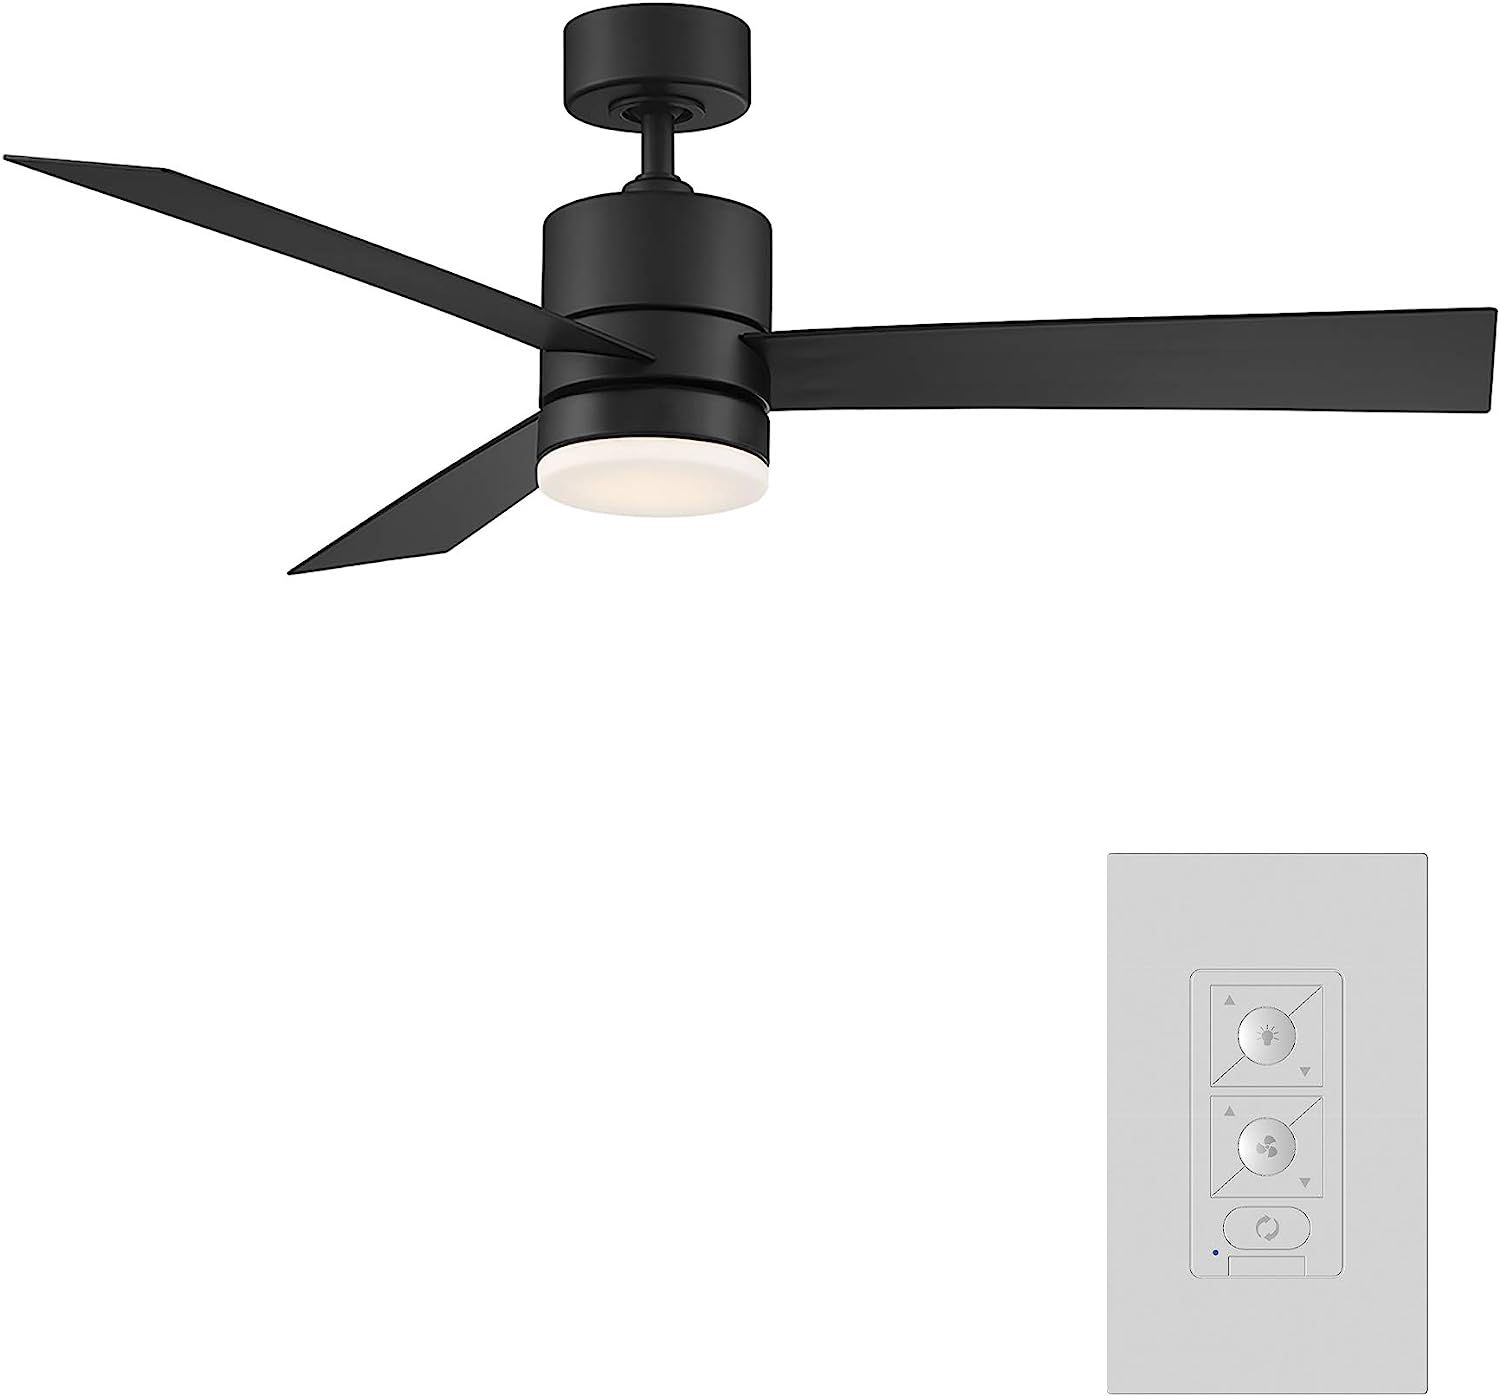 Modern Forms FR-W1803-52L-MB Axis Downrod Smart Home Ceiling Fans, 52in Blade Span, Matte Black | Amazon (US)